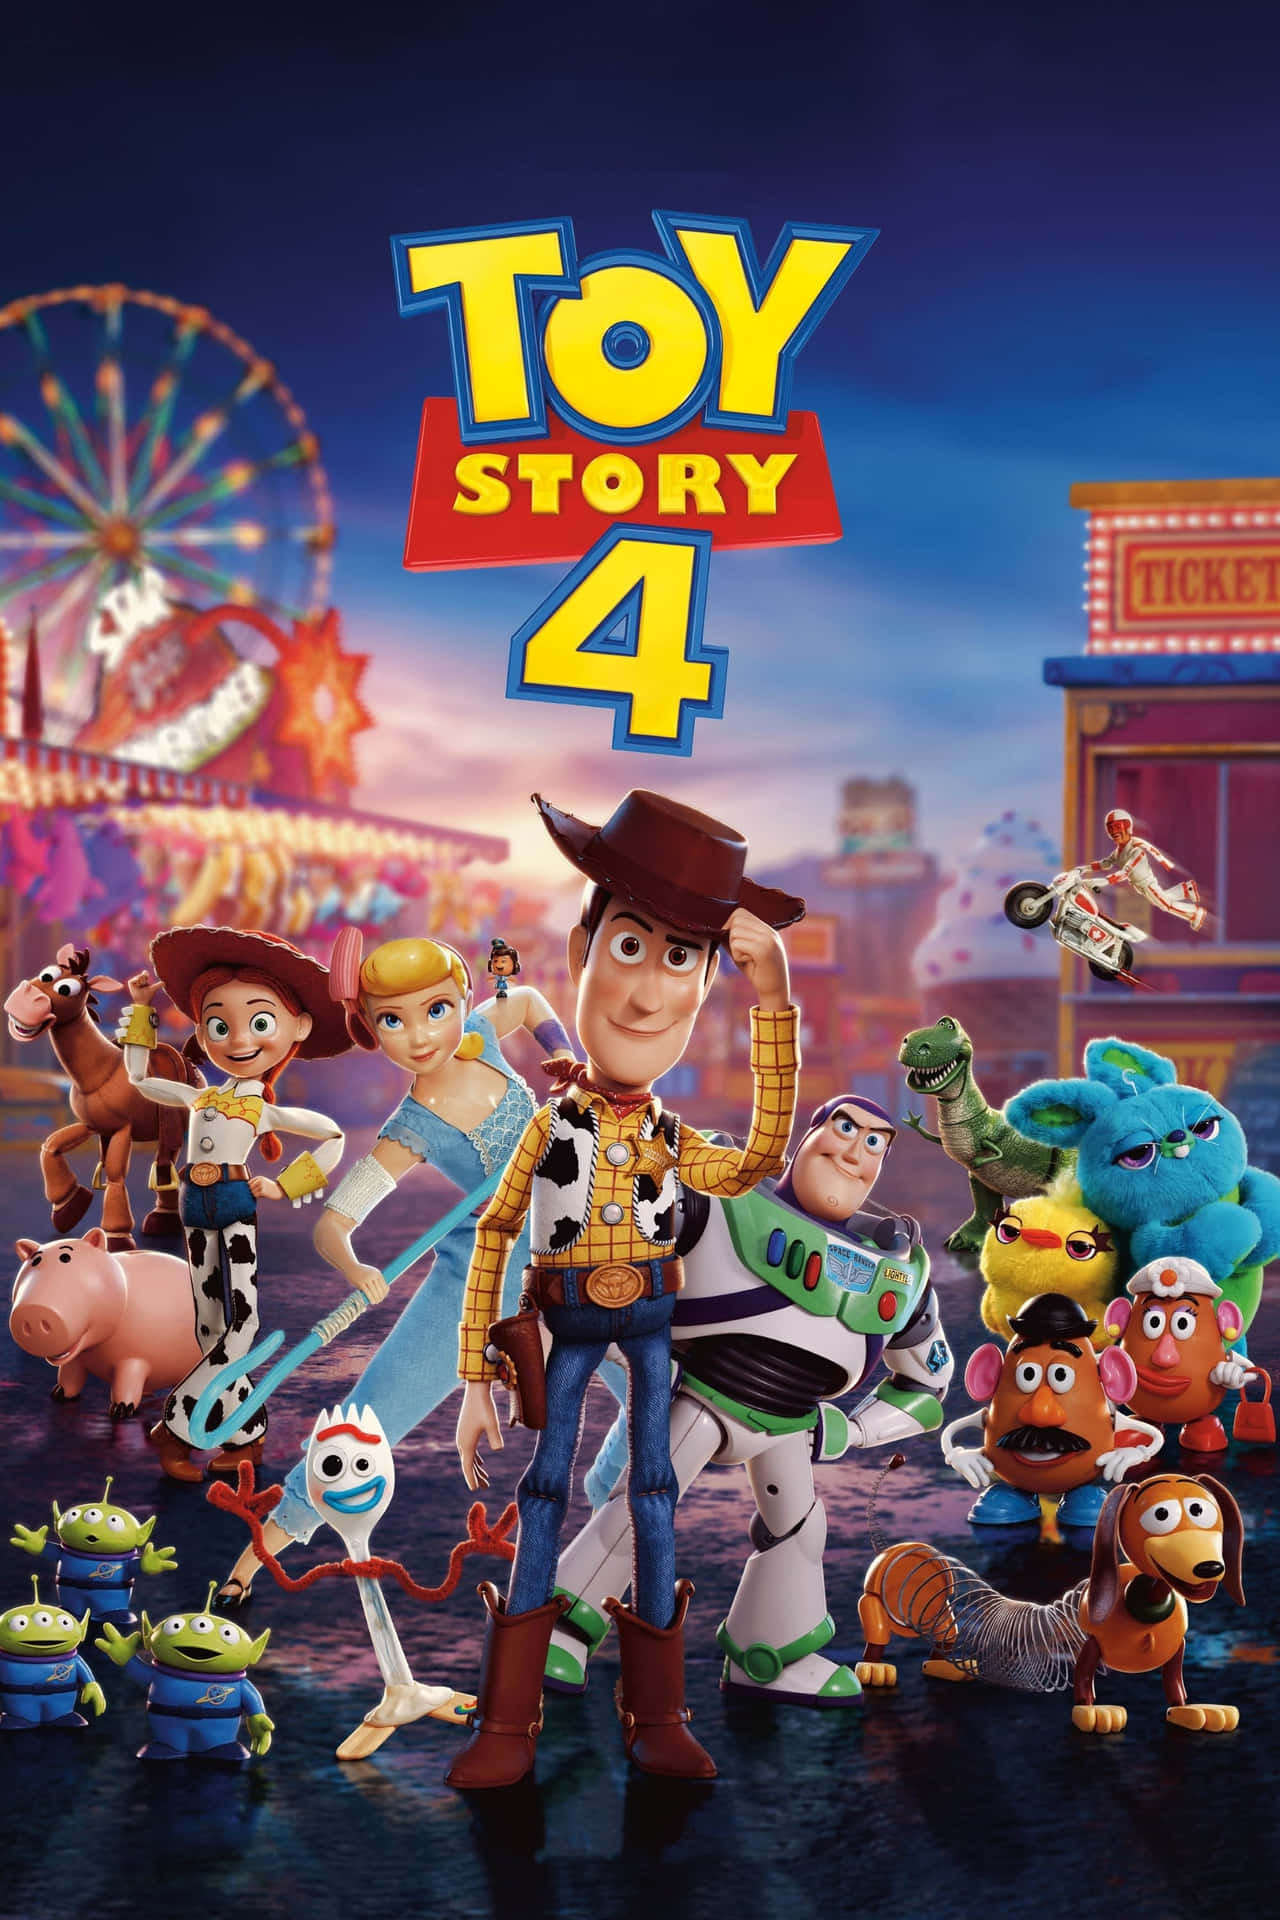 "Explore the Magical World of Toy Story 4"